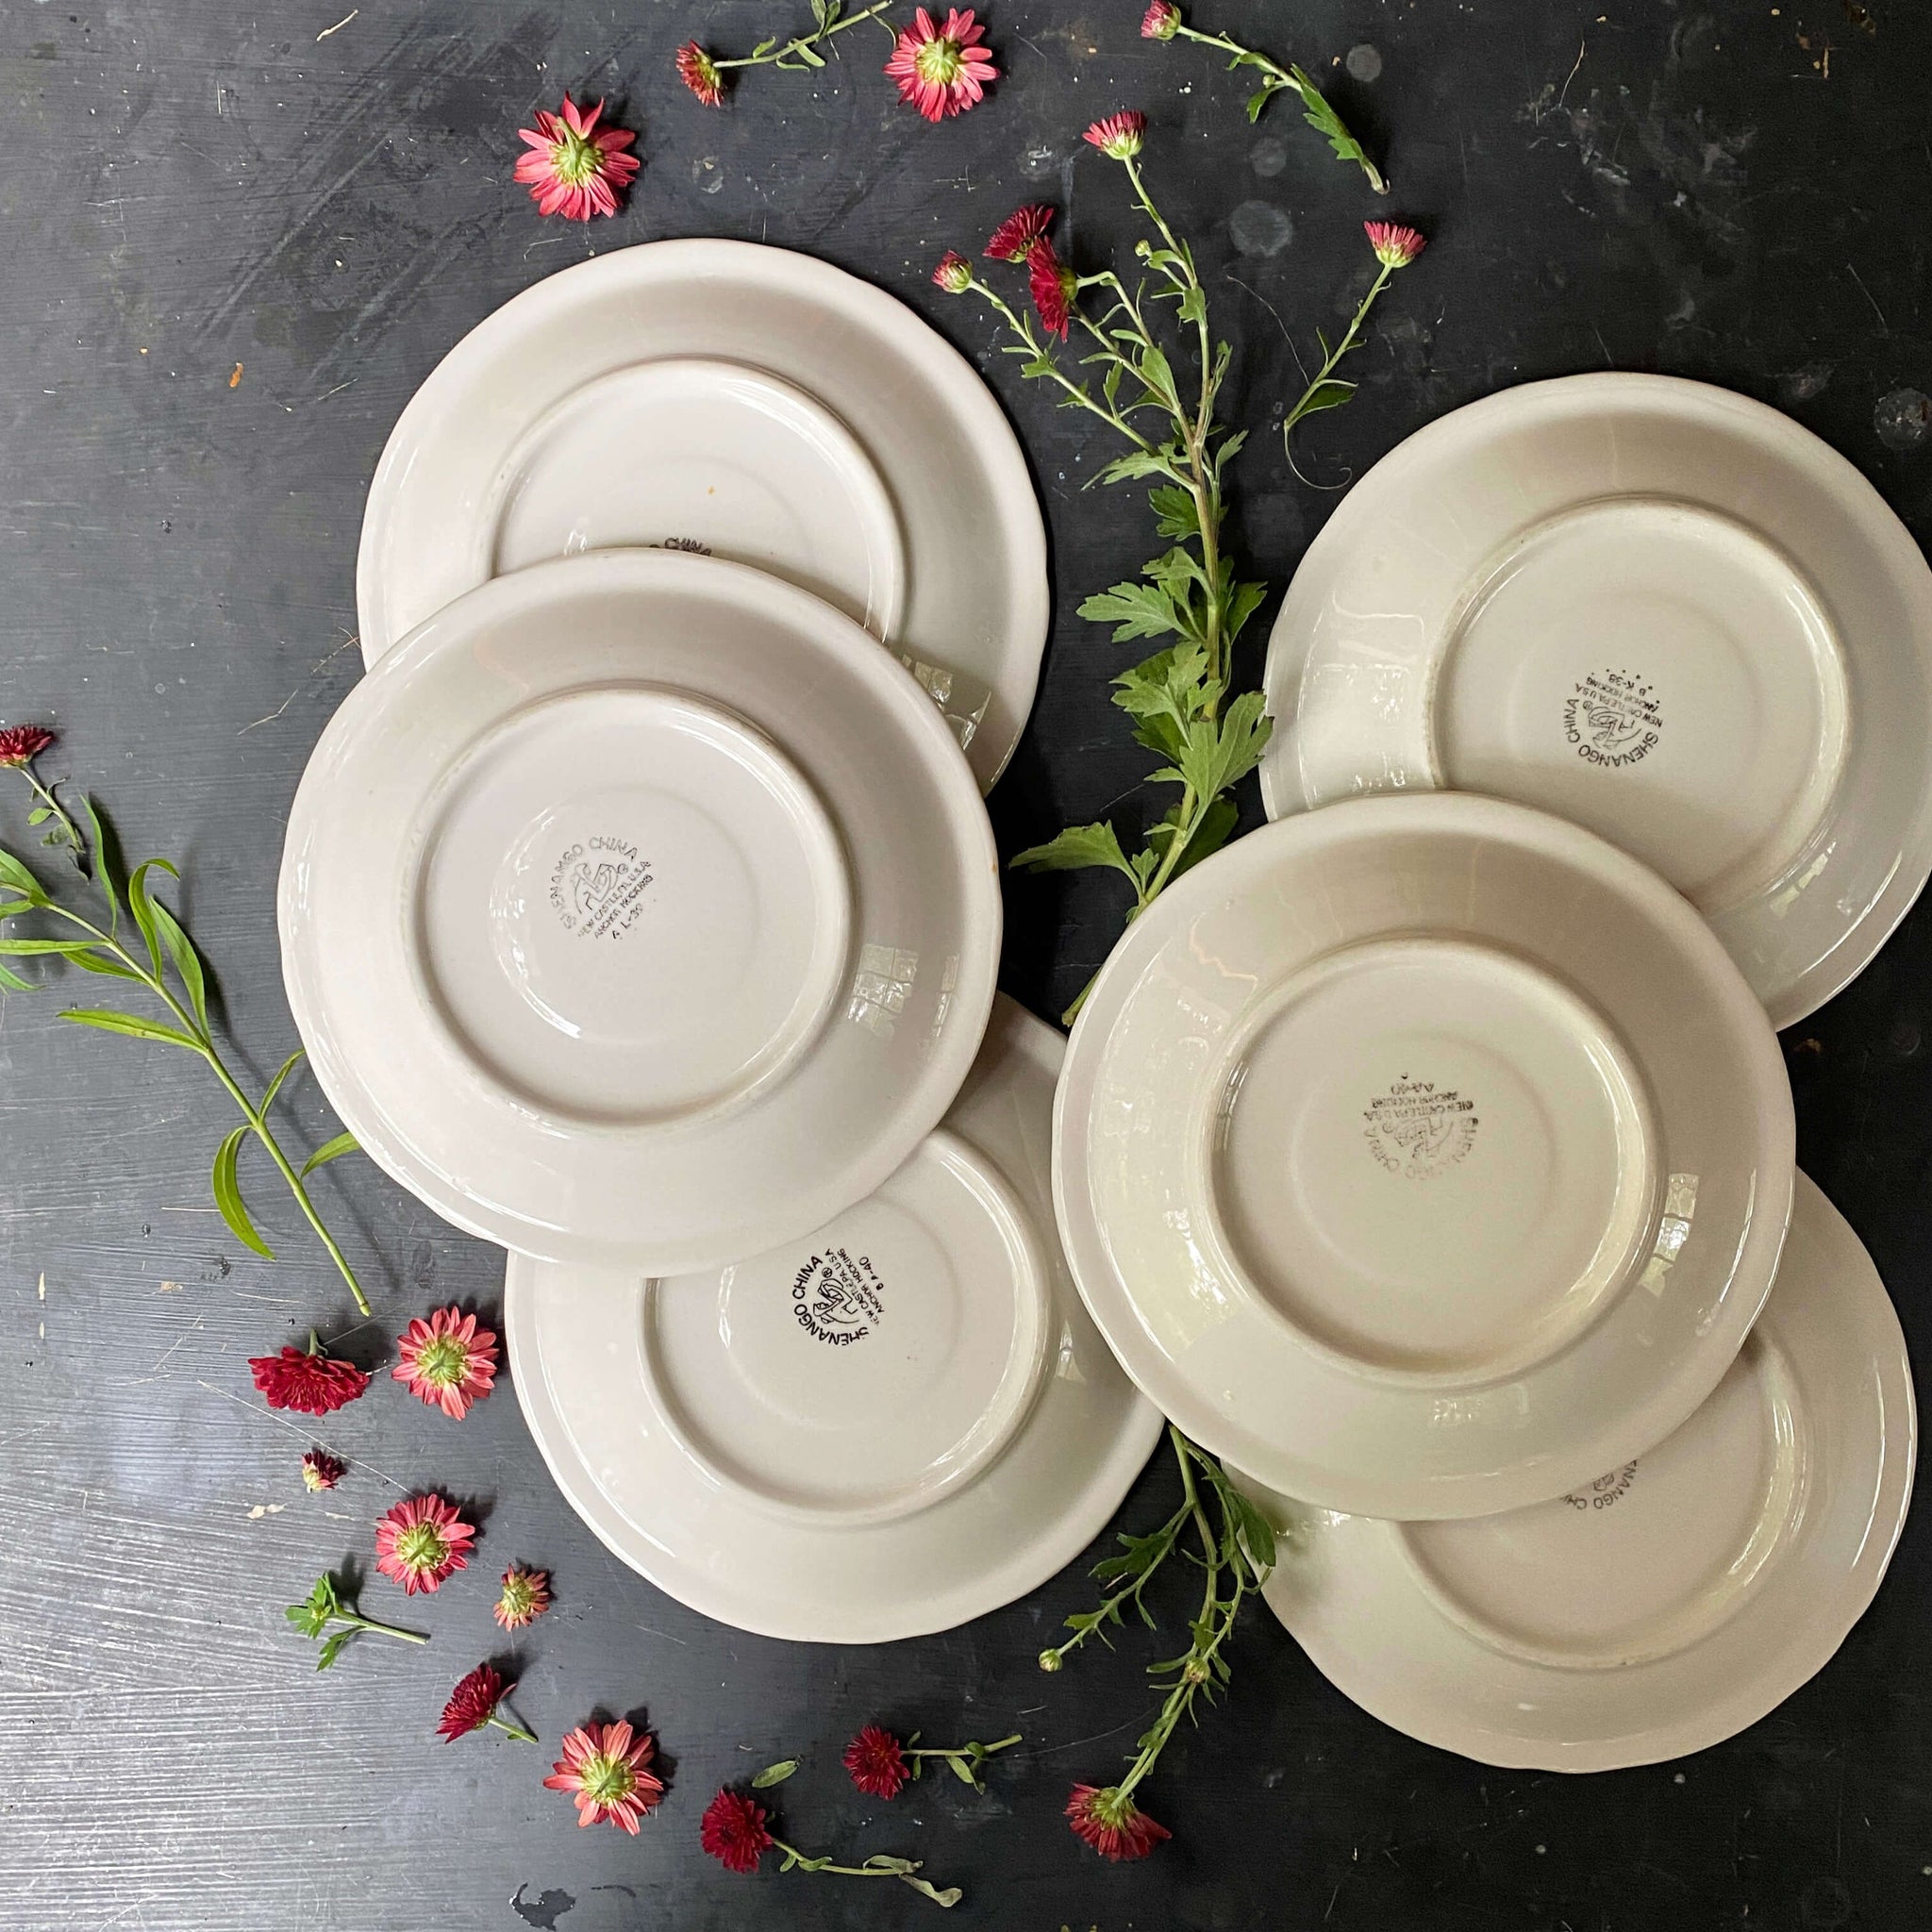 Vintage Shenango Peppercorn Salad Plates - Set of Six Red and White Restaurant Ware circa 1980s